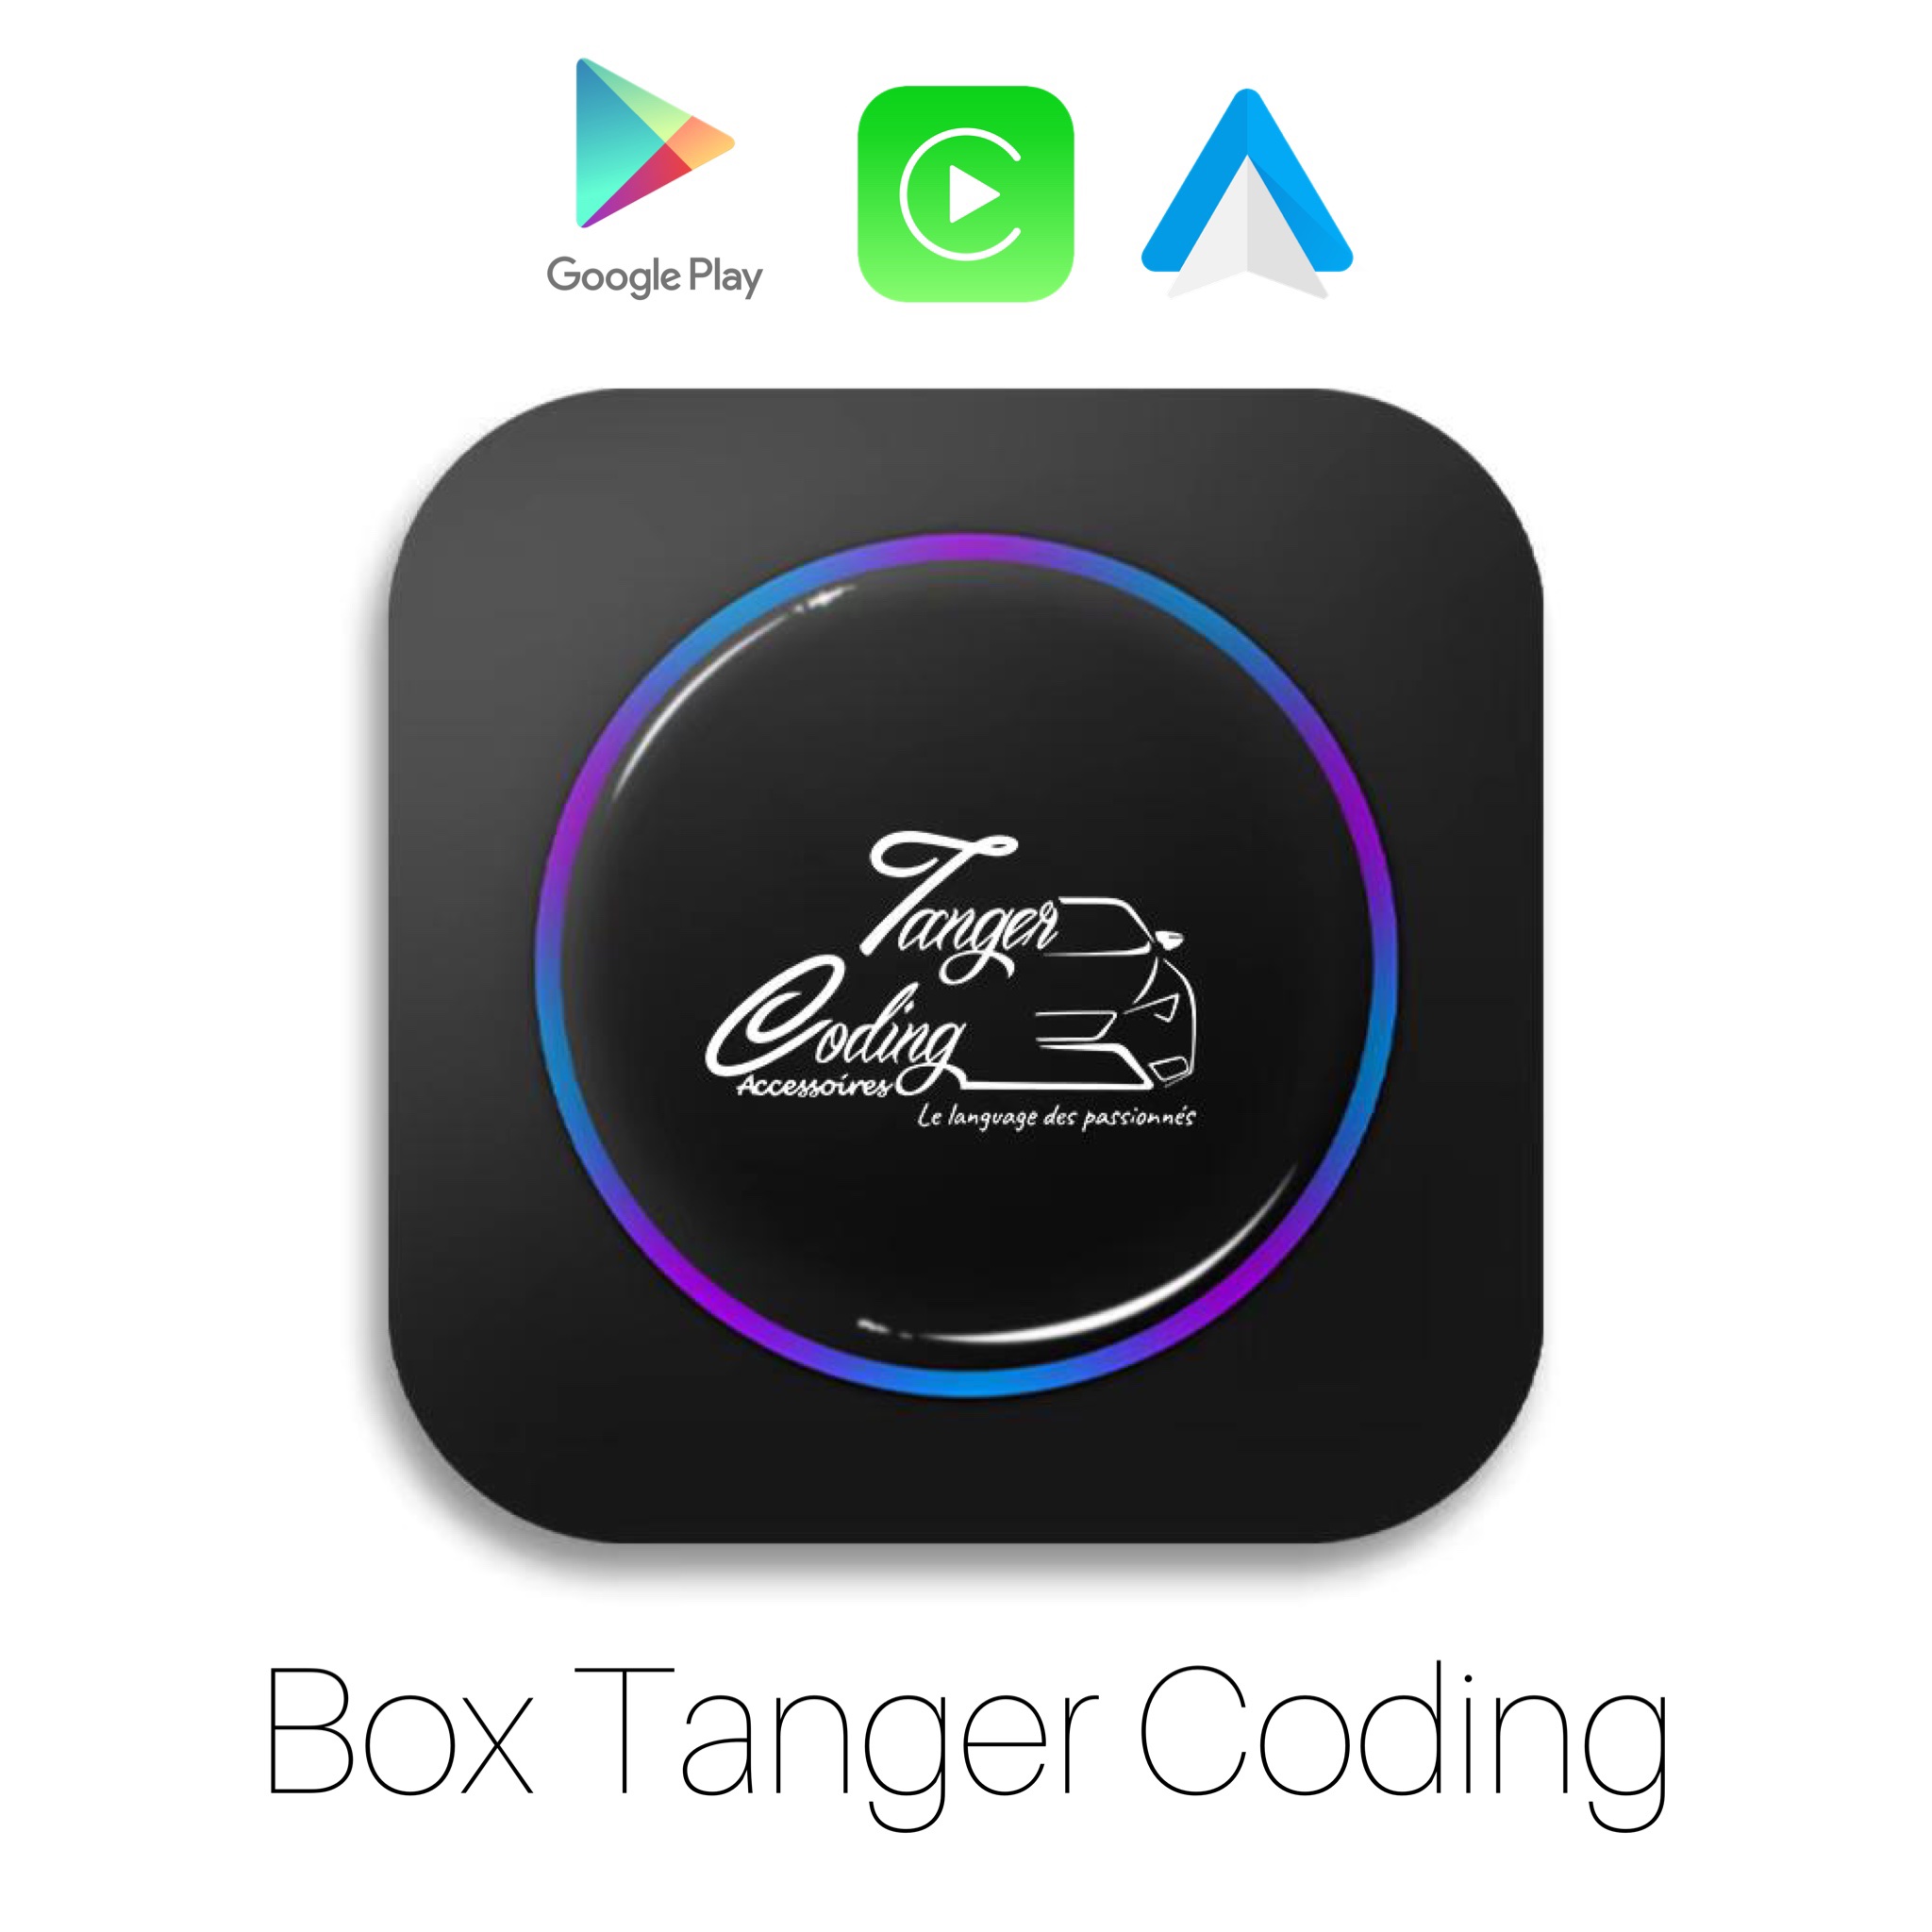 Box Androide  Tanger Coding